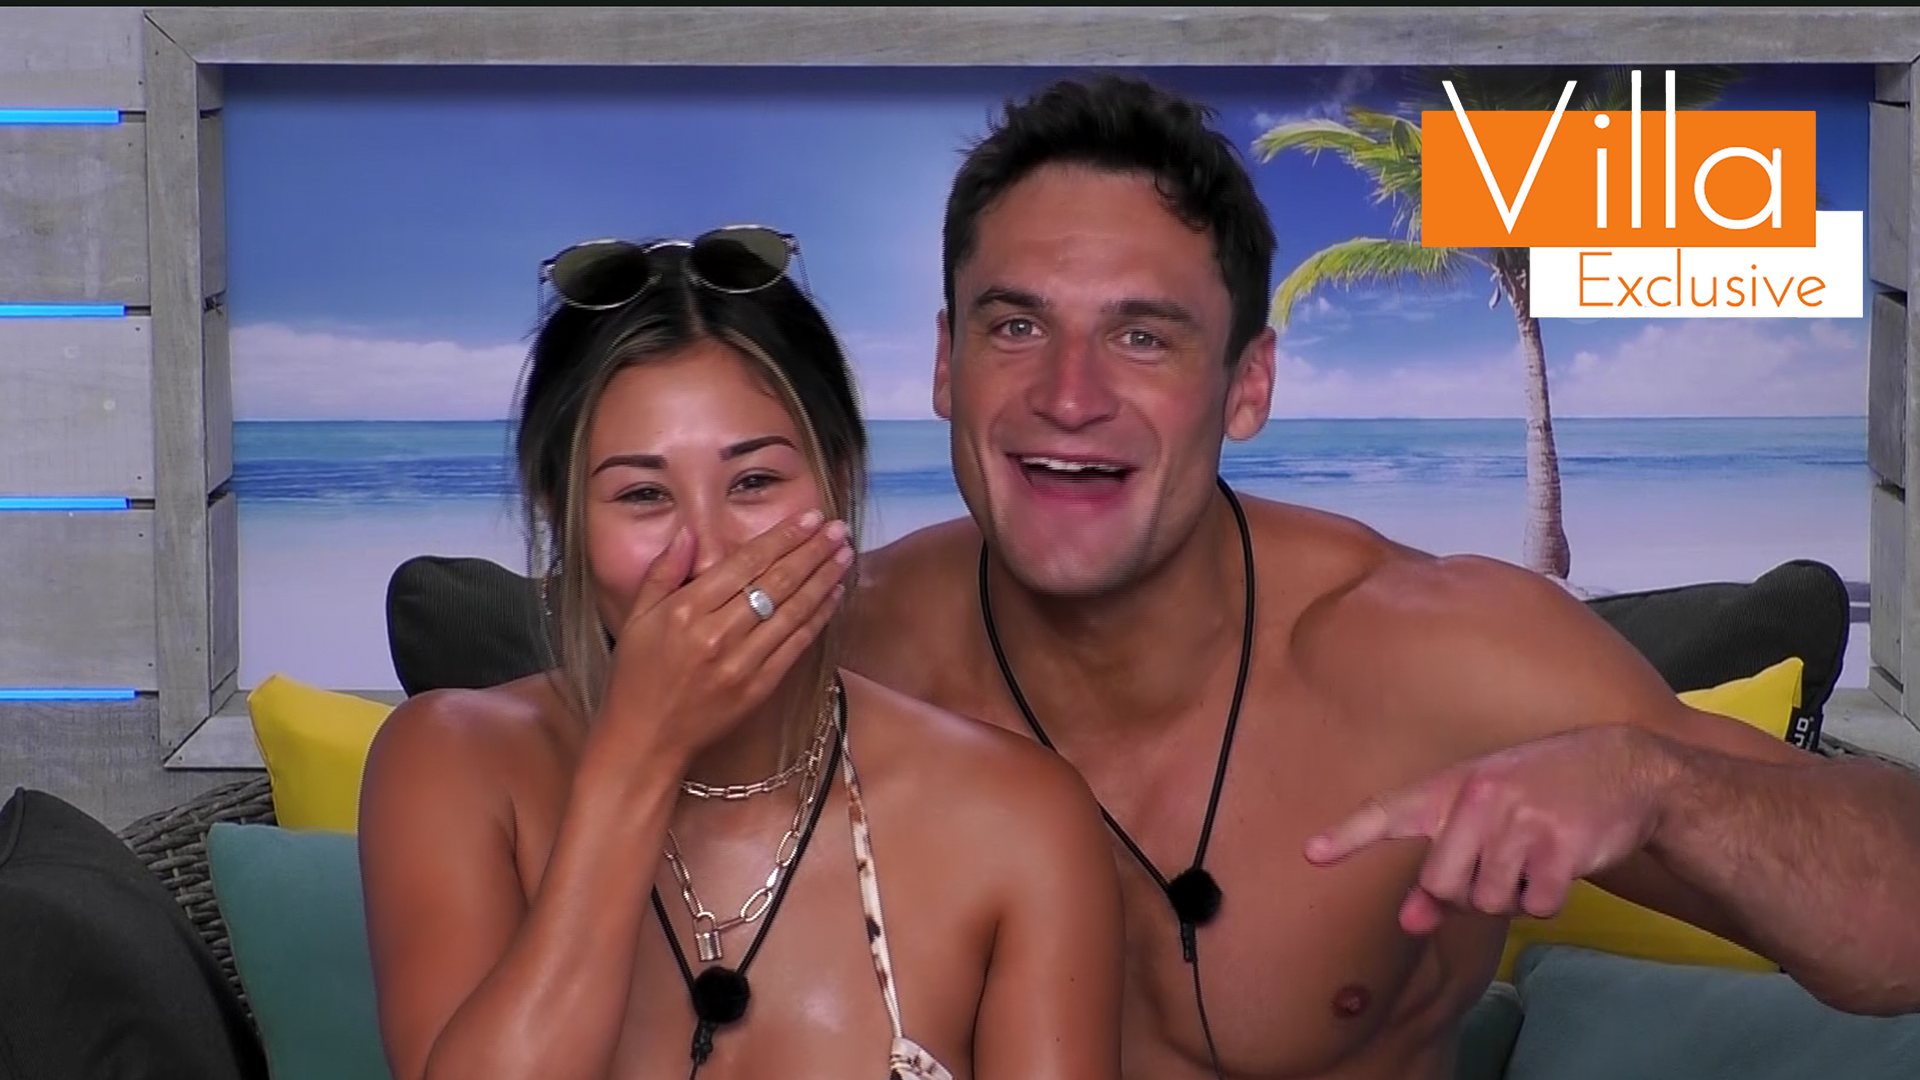 Beach Hut Exclusive: Islanders reveal how they grab someone's attention in the Villa